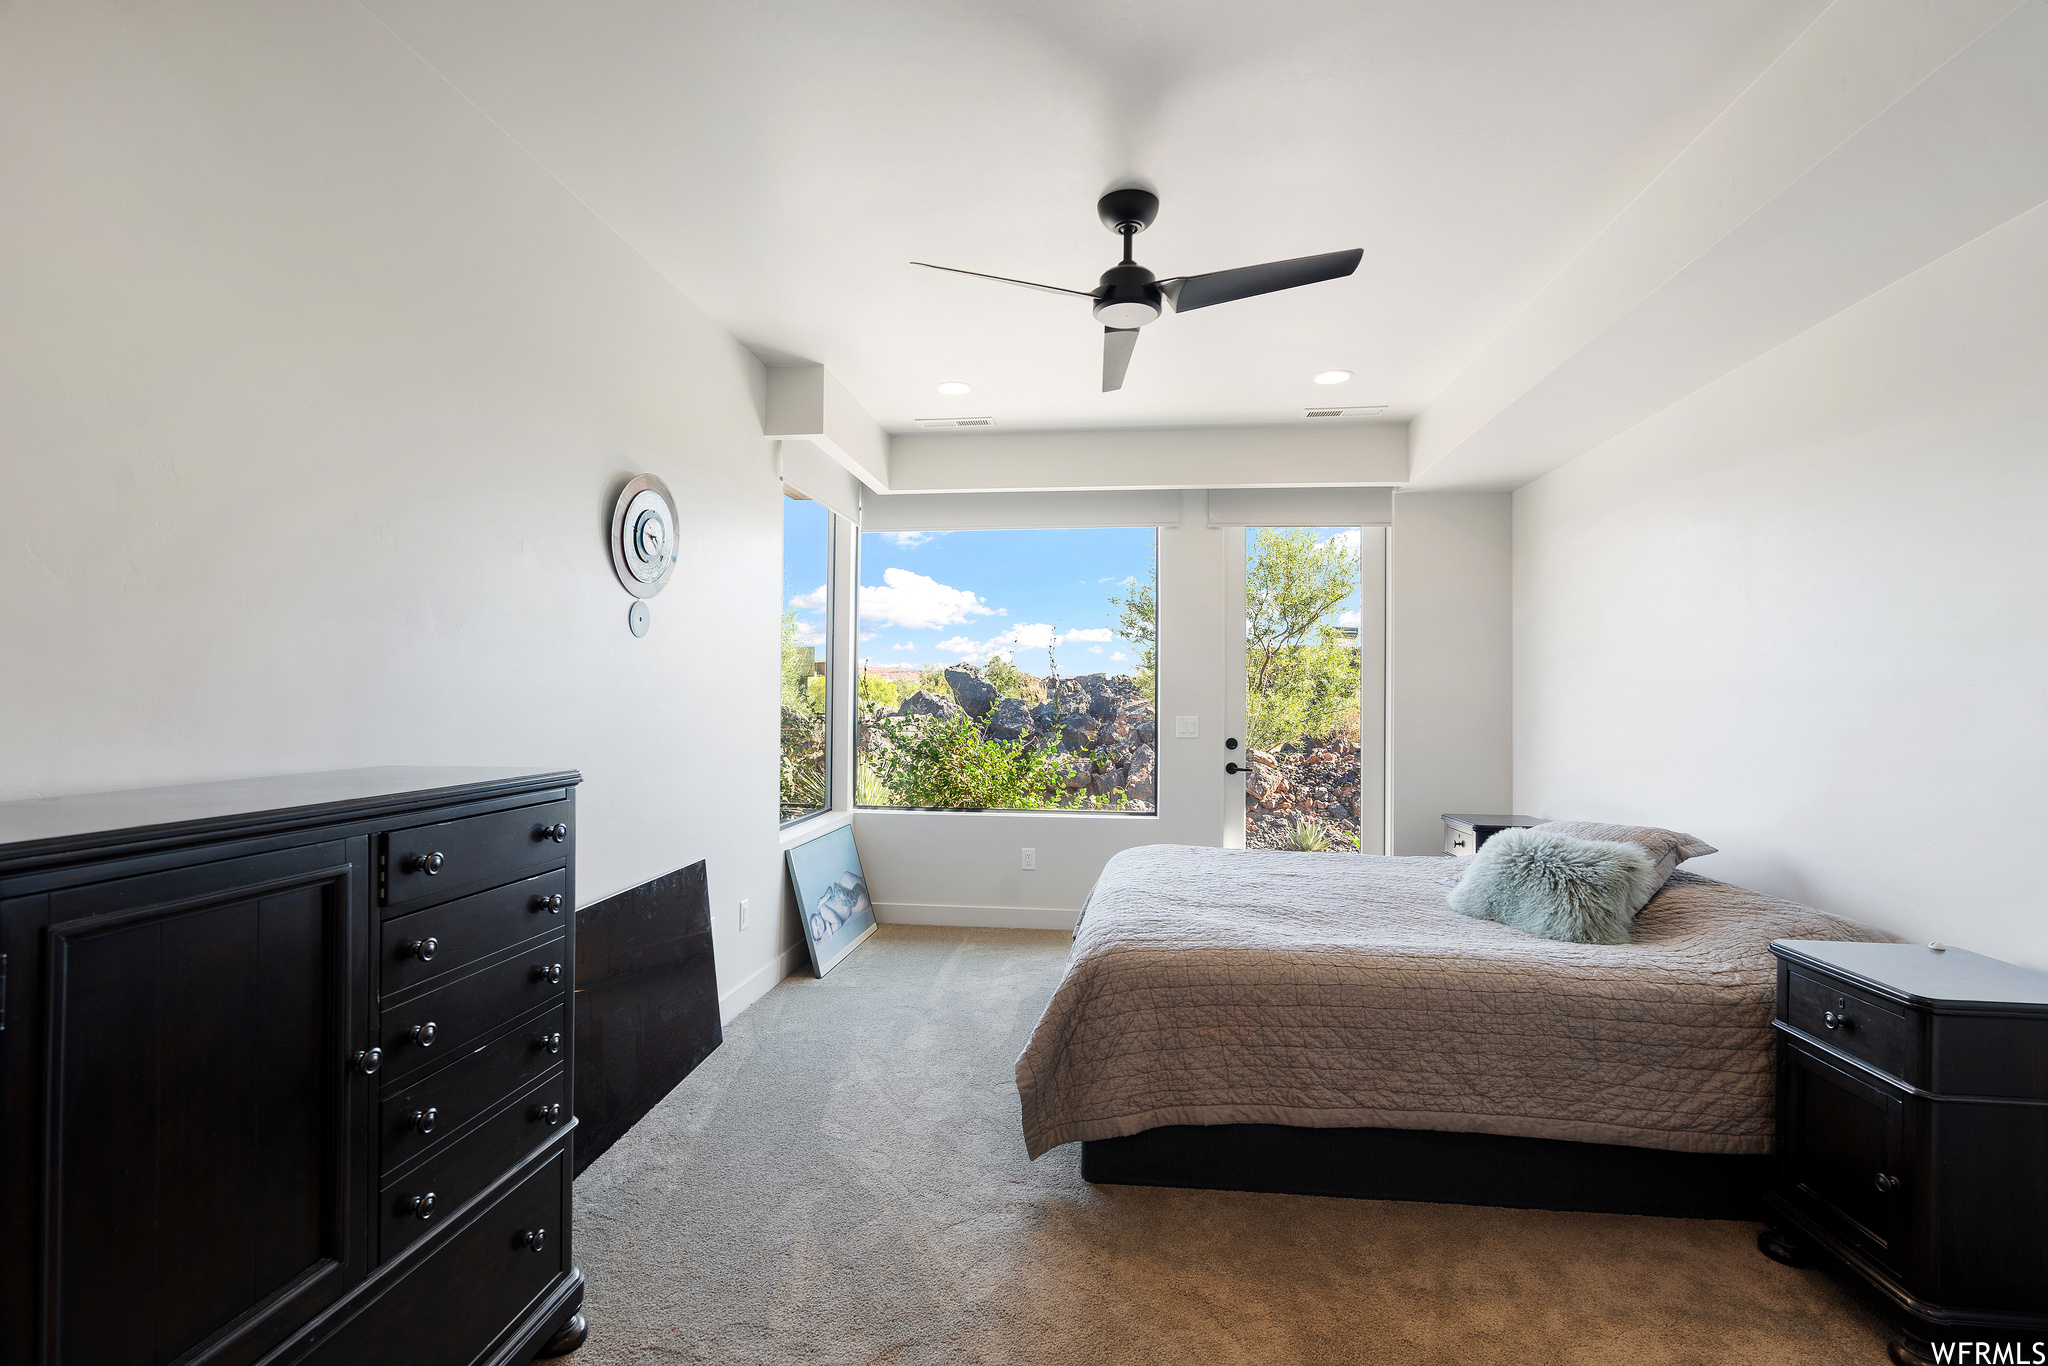 Bedroom featuring ceiling fan, light colored carpet, and access to outside